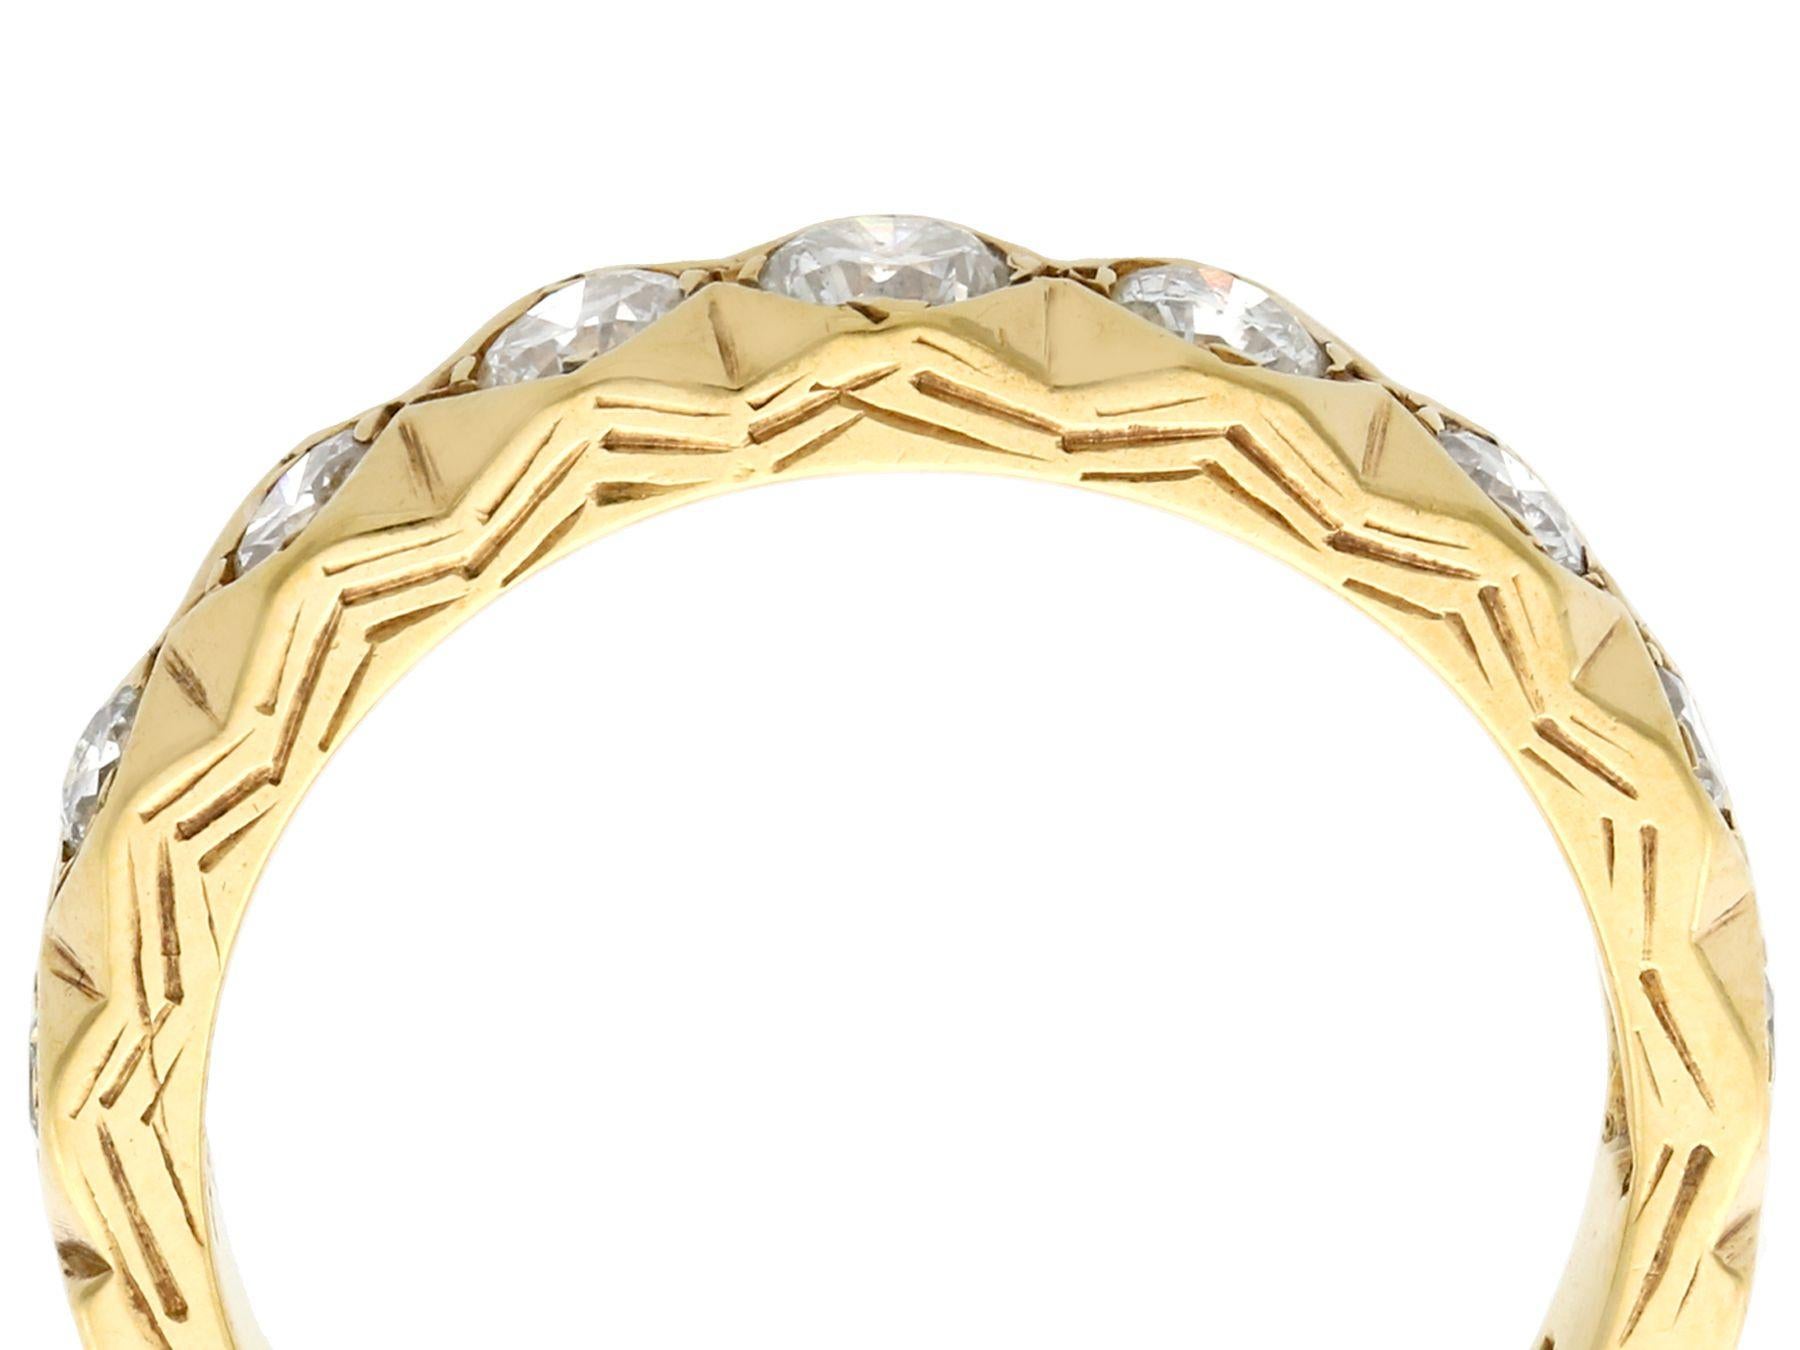 A fine and impressive vintage 0.75 carat diamond and 18 karat yellow gold half eternity ring; part of our vintage jewelry/estate jewelry collections

This impressive vintage diamond eternity ring has been crafted in 18k yellow gold.

This vintage